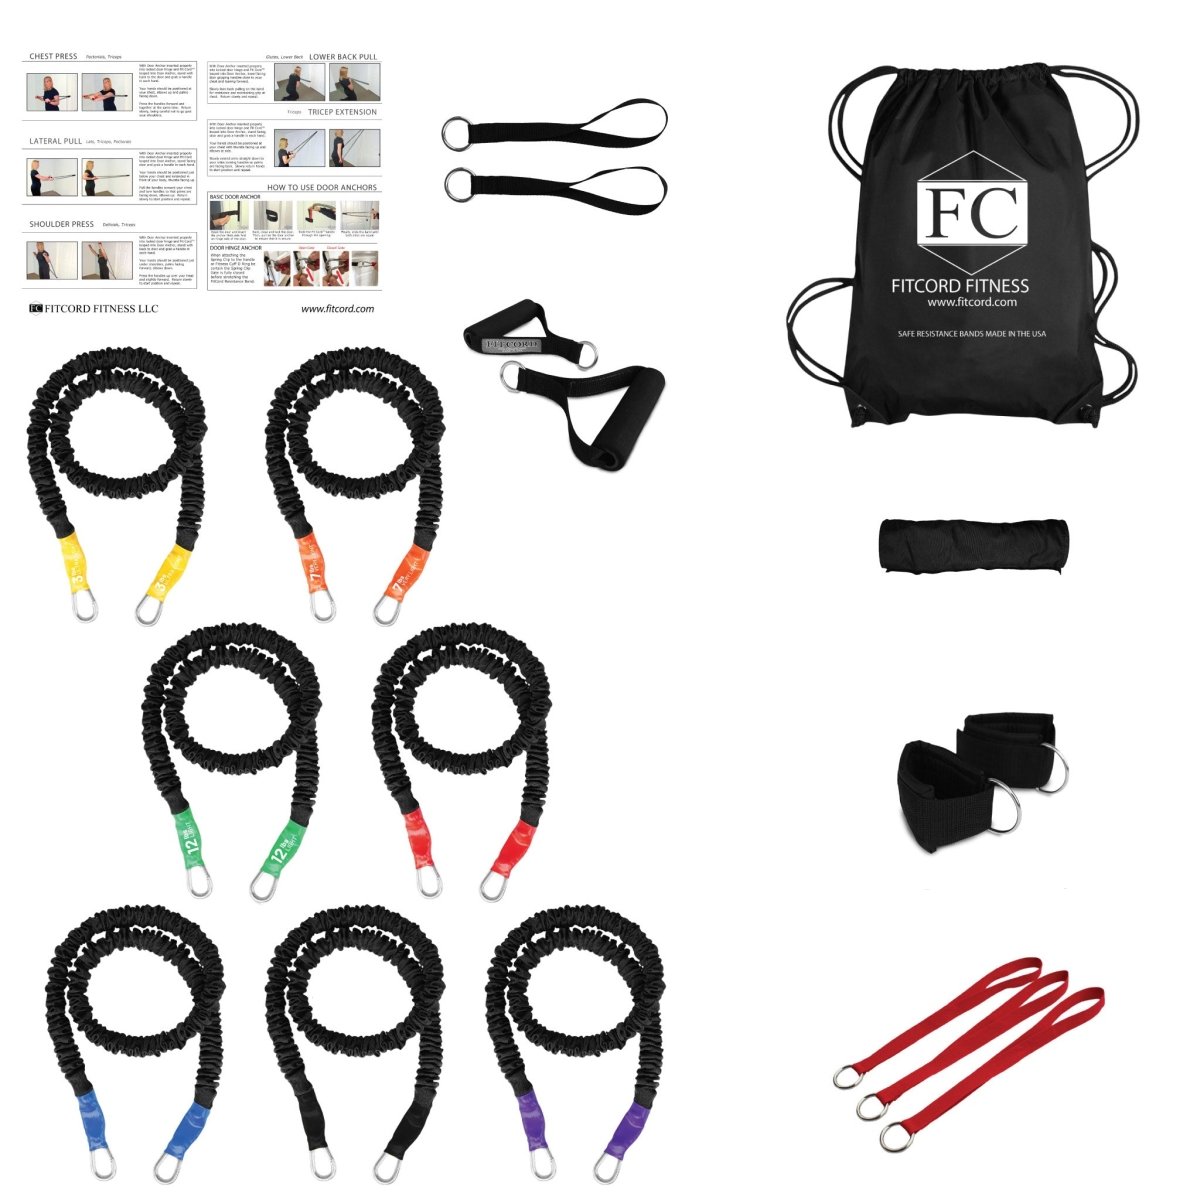 A complete set of resistance bands that completely replaces your gym membership. American Made and covered for safety, this set of 7 bands, handles, cuffs, straps and anchors  is all you need for a complete functional fitness gym at home. 